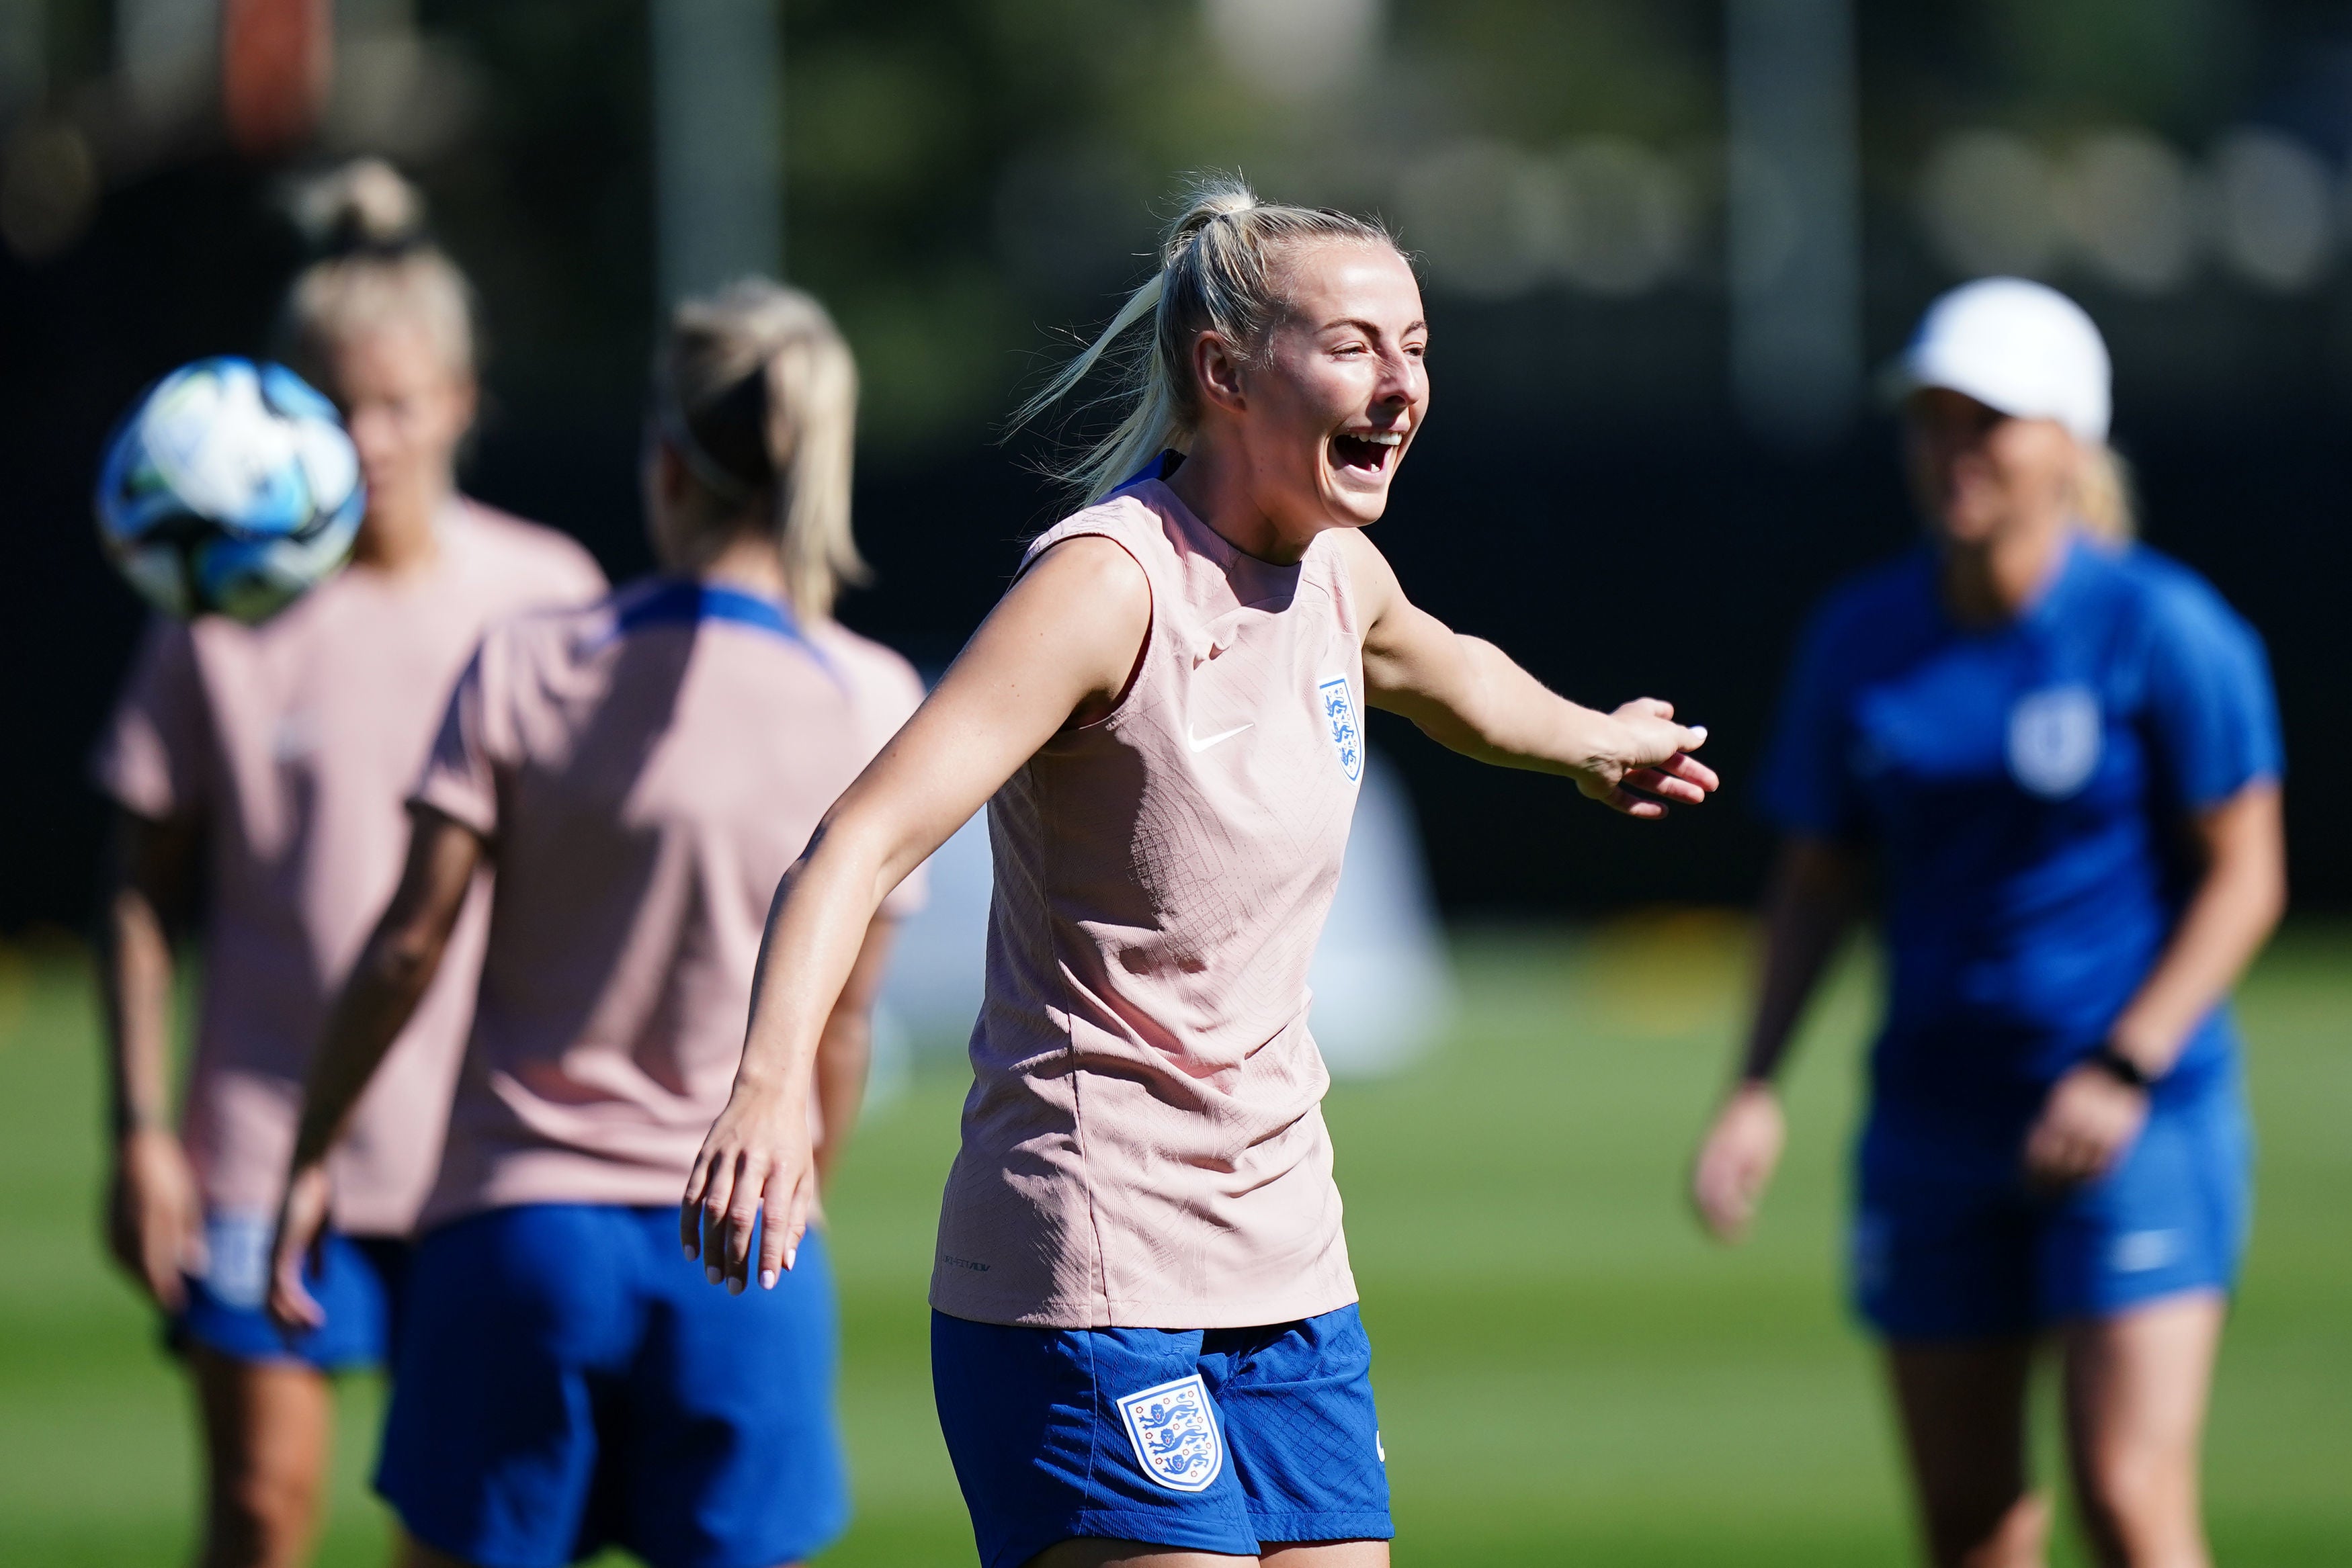 The Lionesses will kick off their World Cup campaign in a match against Haiti on Saturday 22 July in Brisbane, Australia